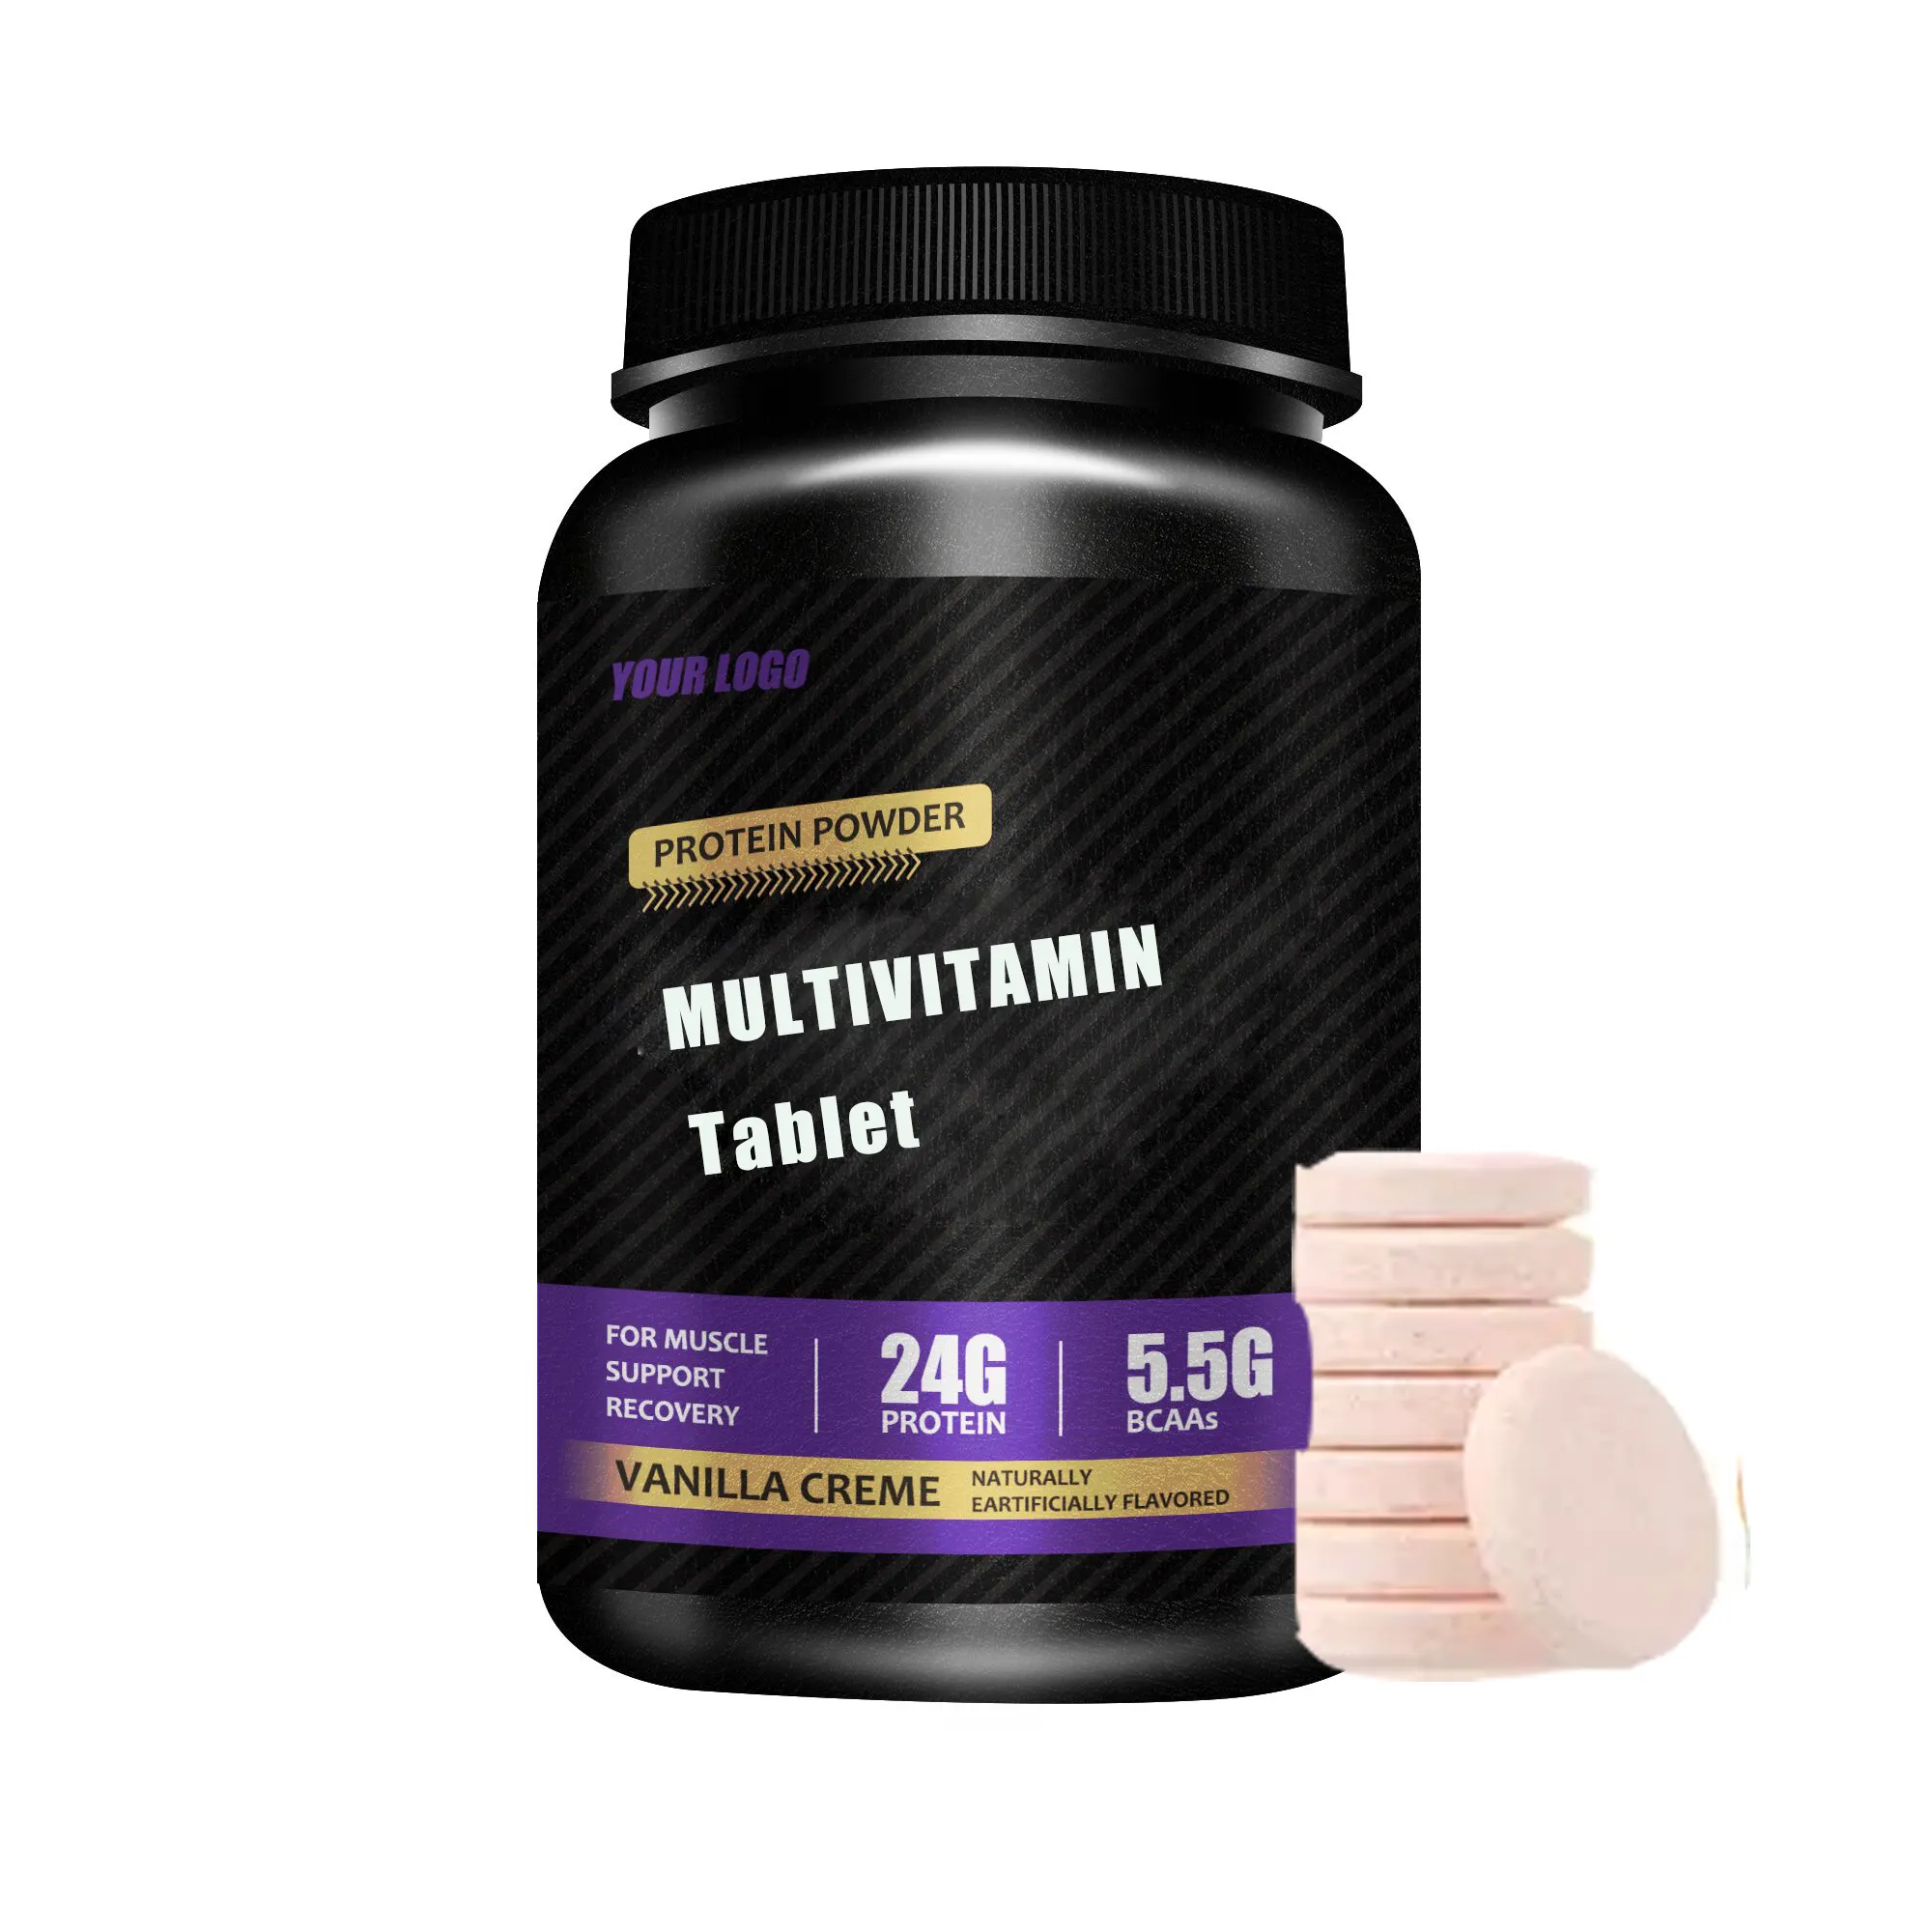 health food Supplement multivitamin and mineral vitamin Capsules multivitamins tablets